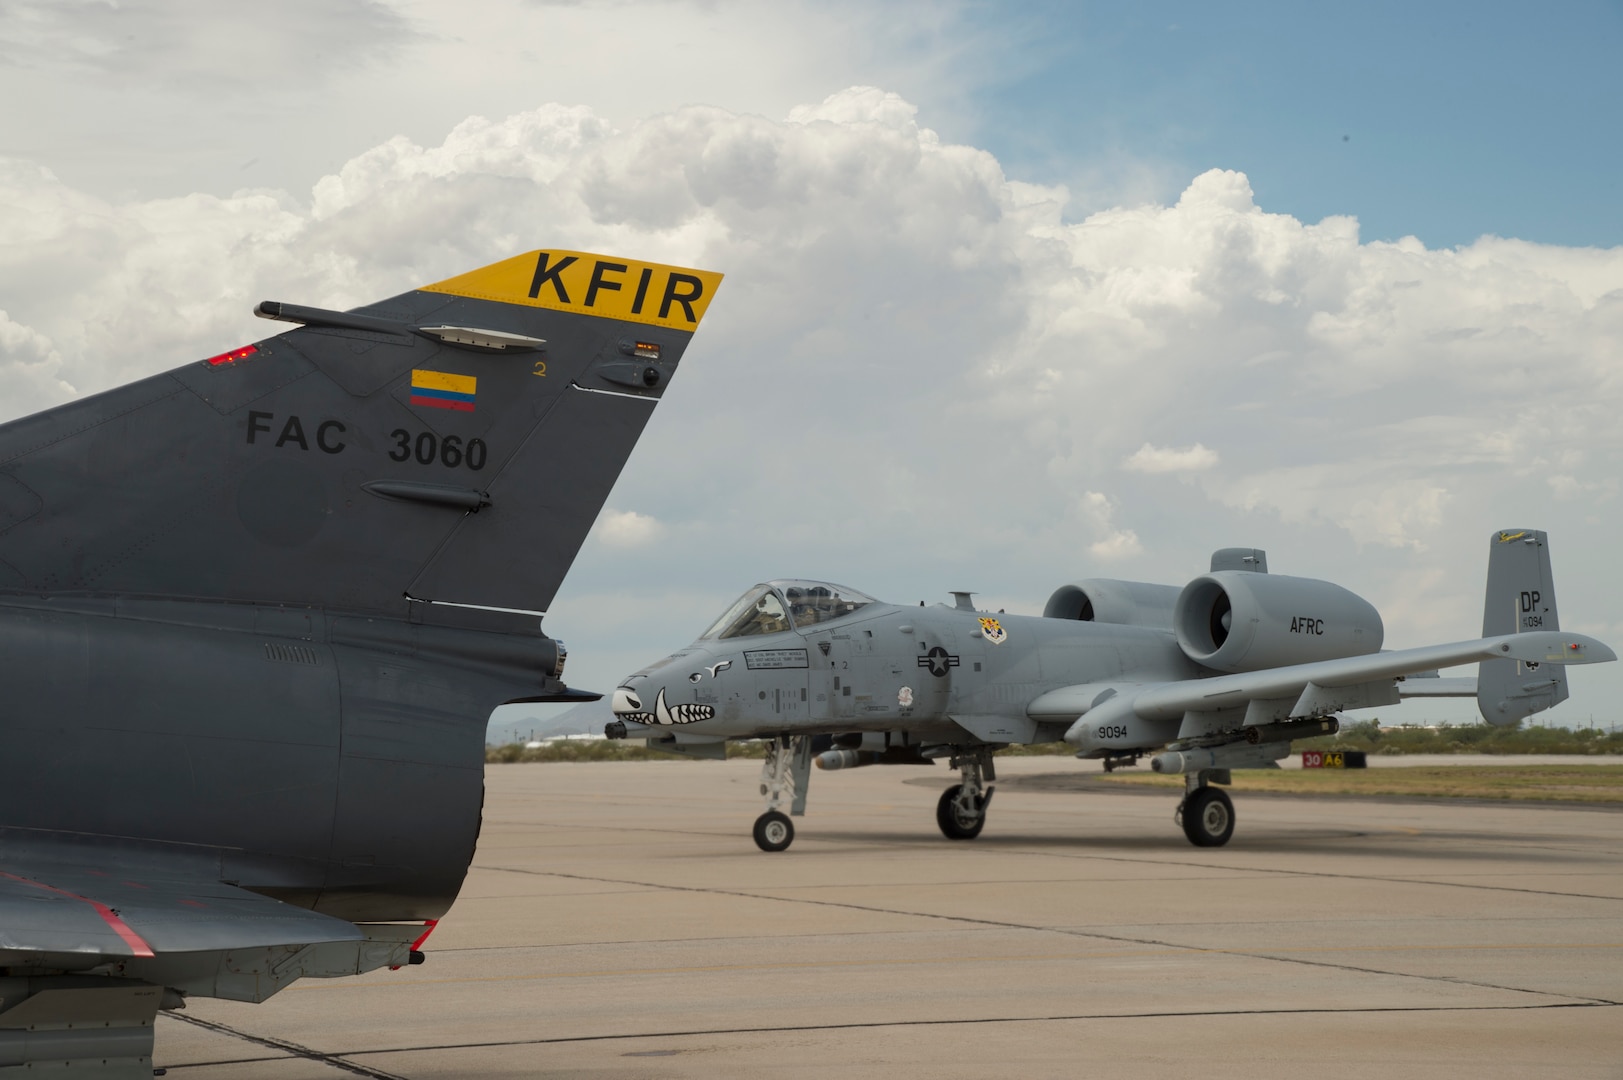 Colombian Kfirs fighters train with the A-10, F-16